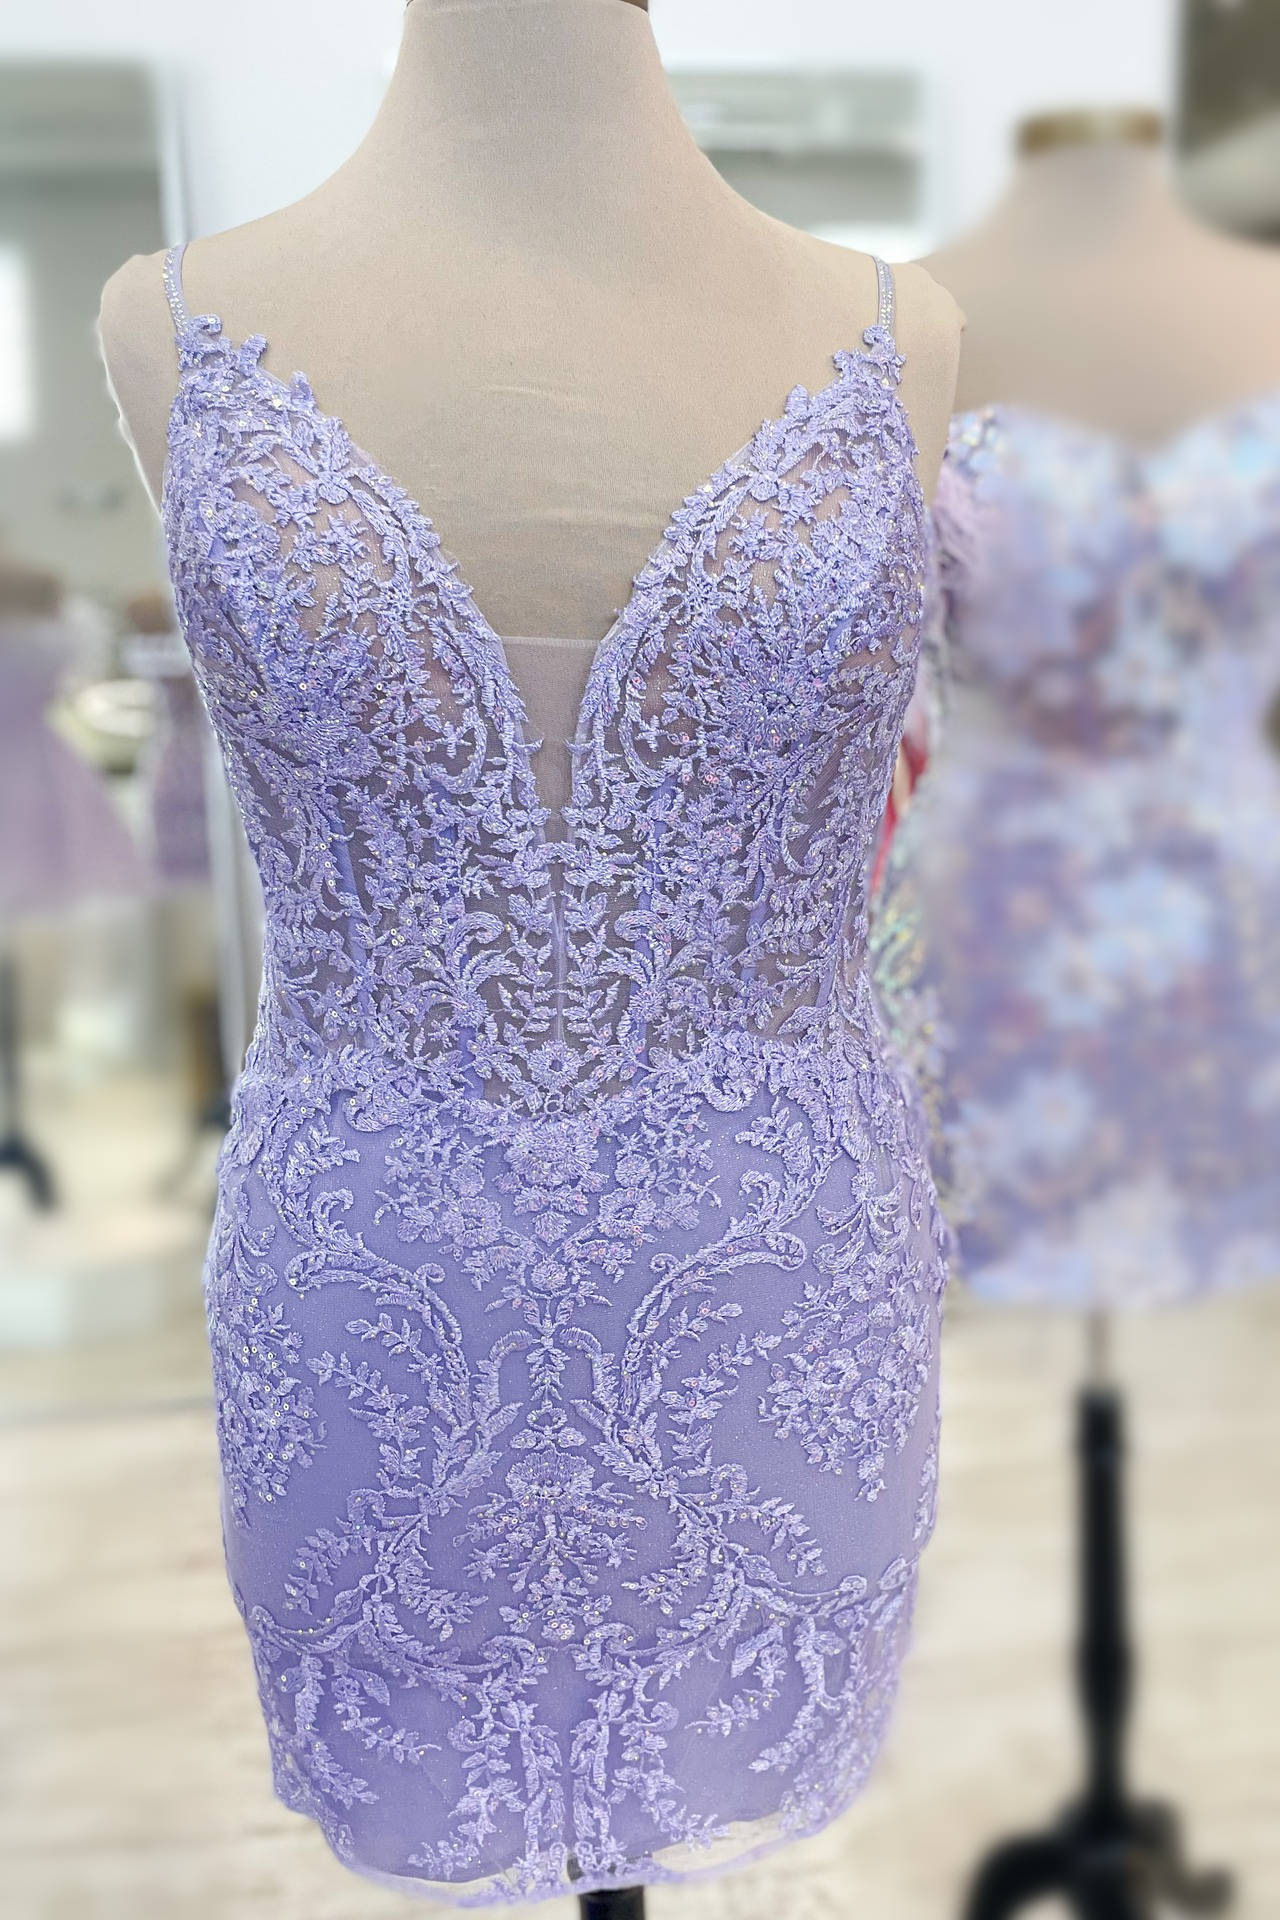 Homecoming Dresses Silk, Plunging Neck Lavender Embroidery Bodycon Homecoming Dress